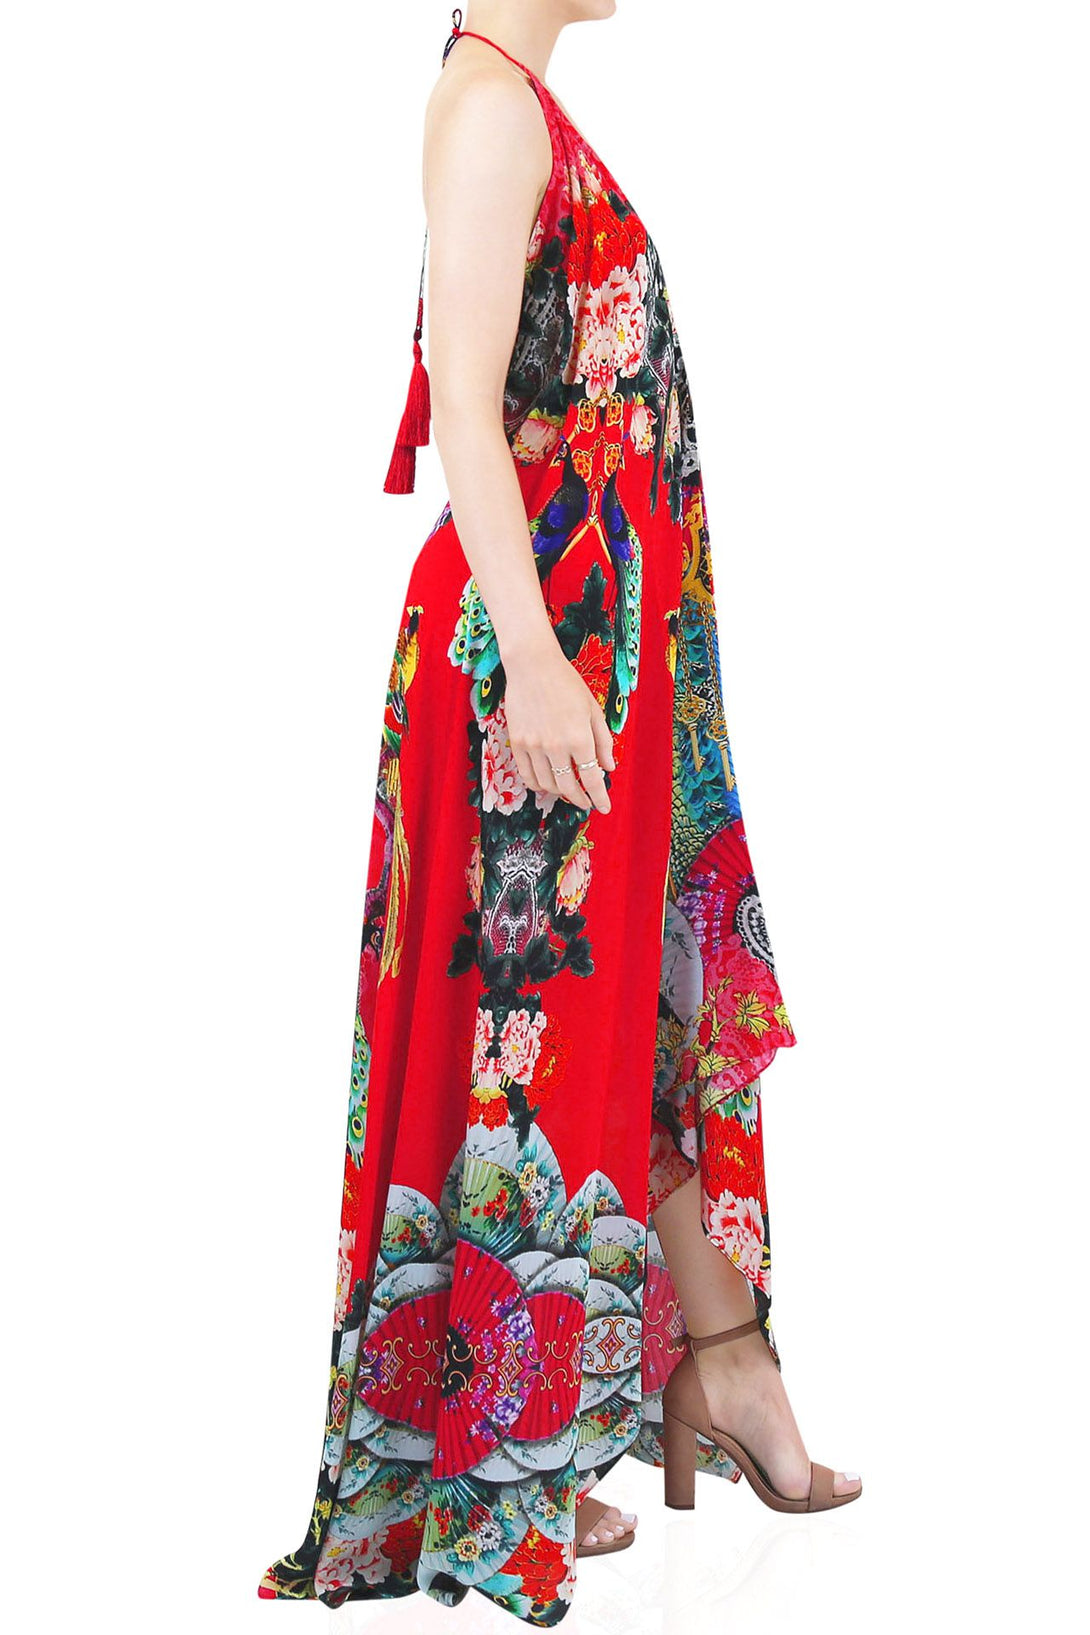   red frock for ladies, formal dresses for women, Shahida Parides, plunging neckline cocktail dress,